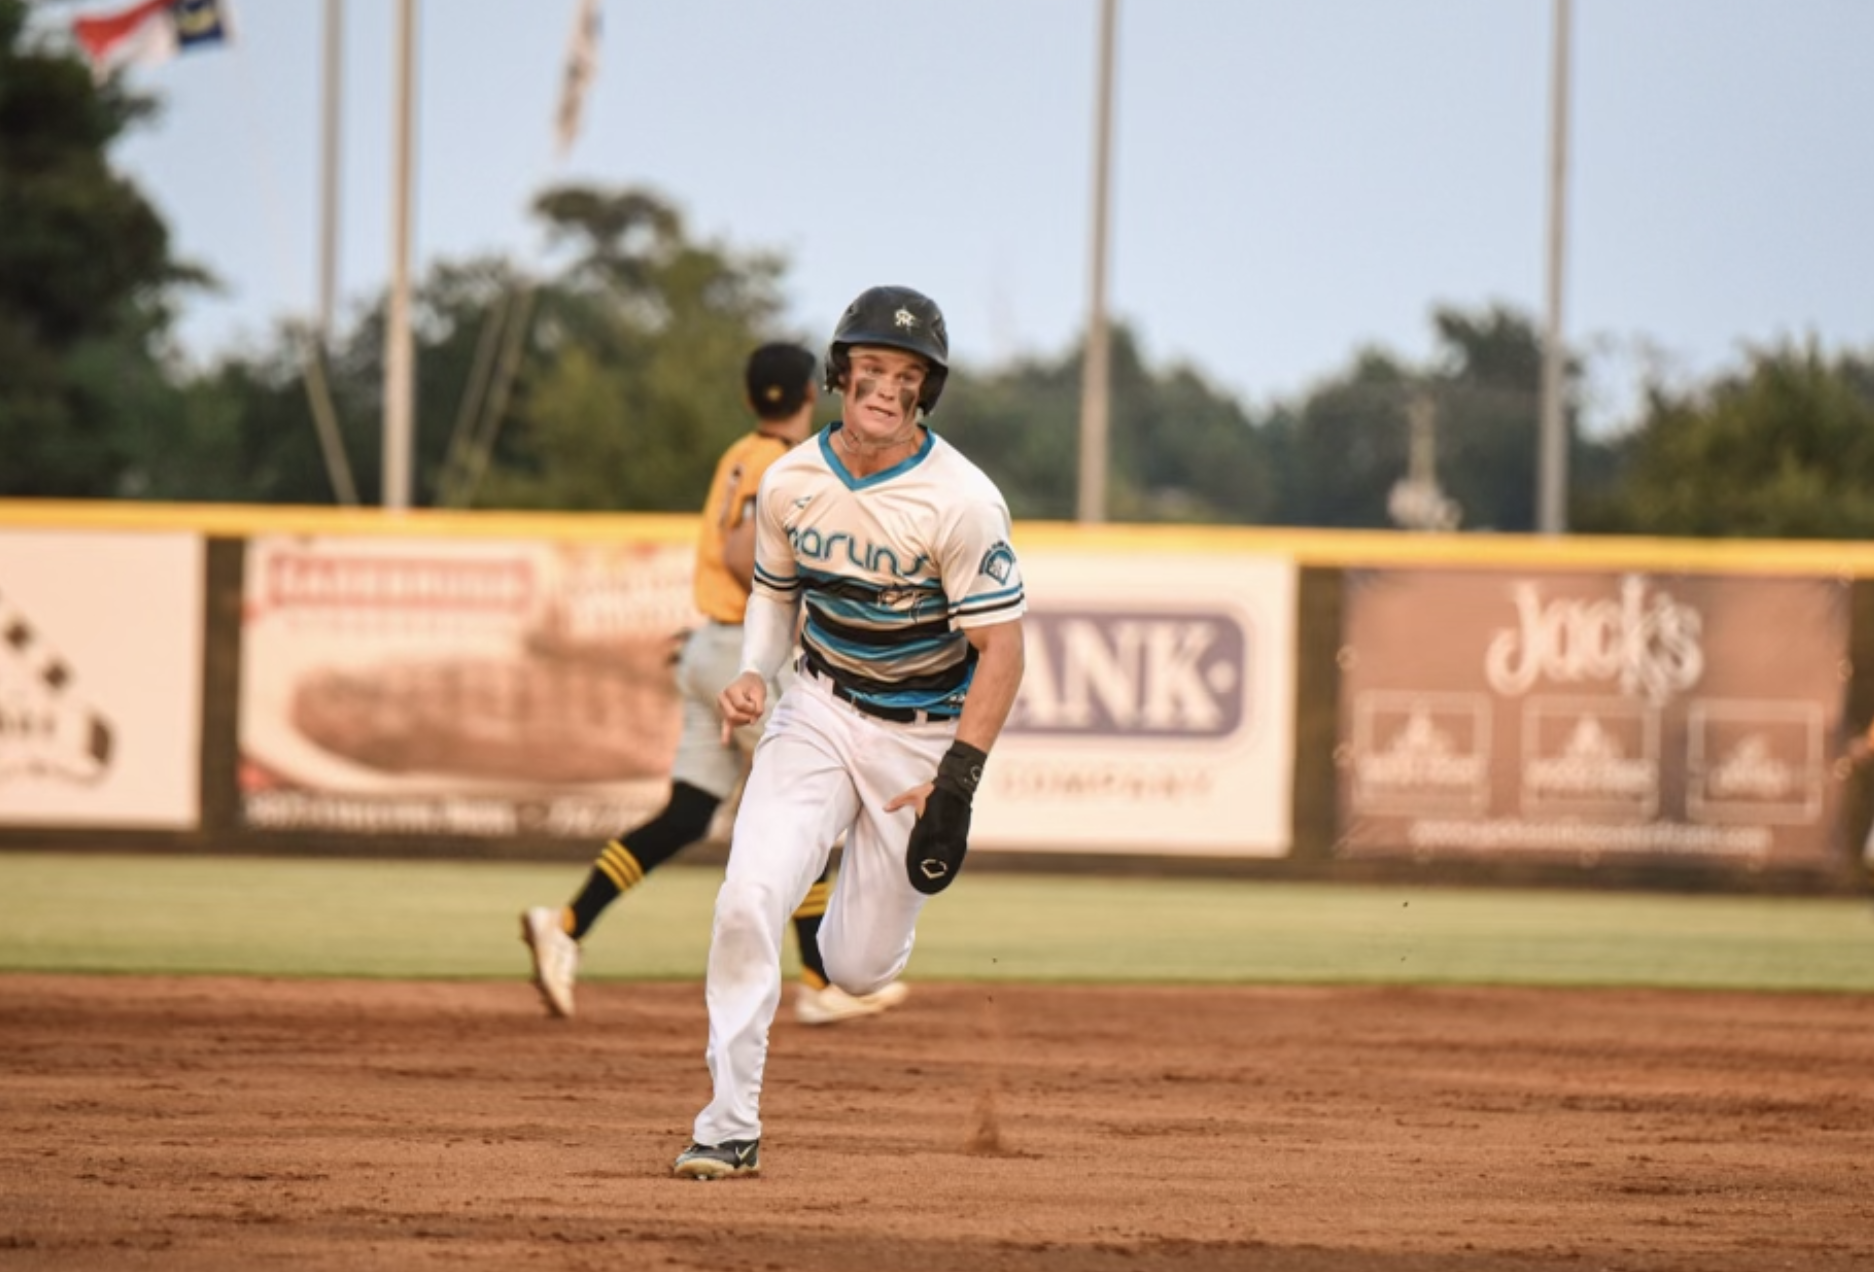 Marlins Secure 6-2 Victory Over Wilson Tobs in Coastal Plain League Clash